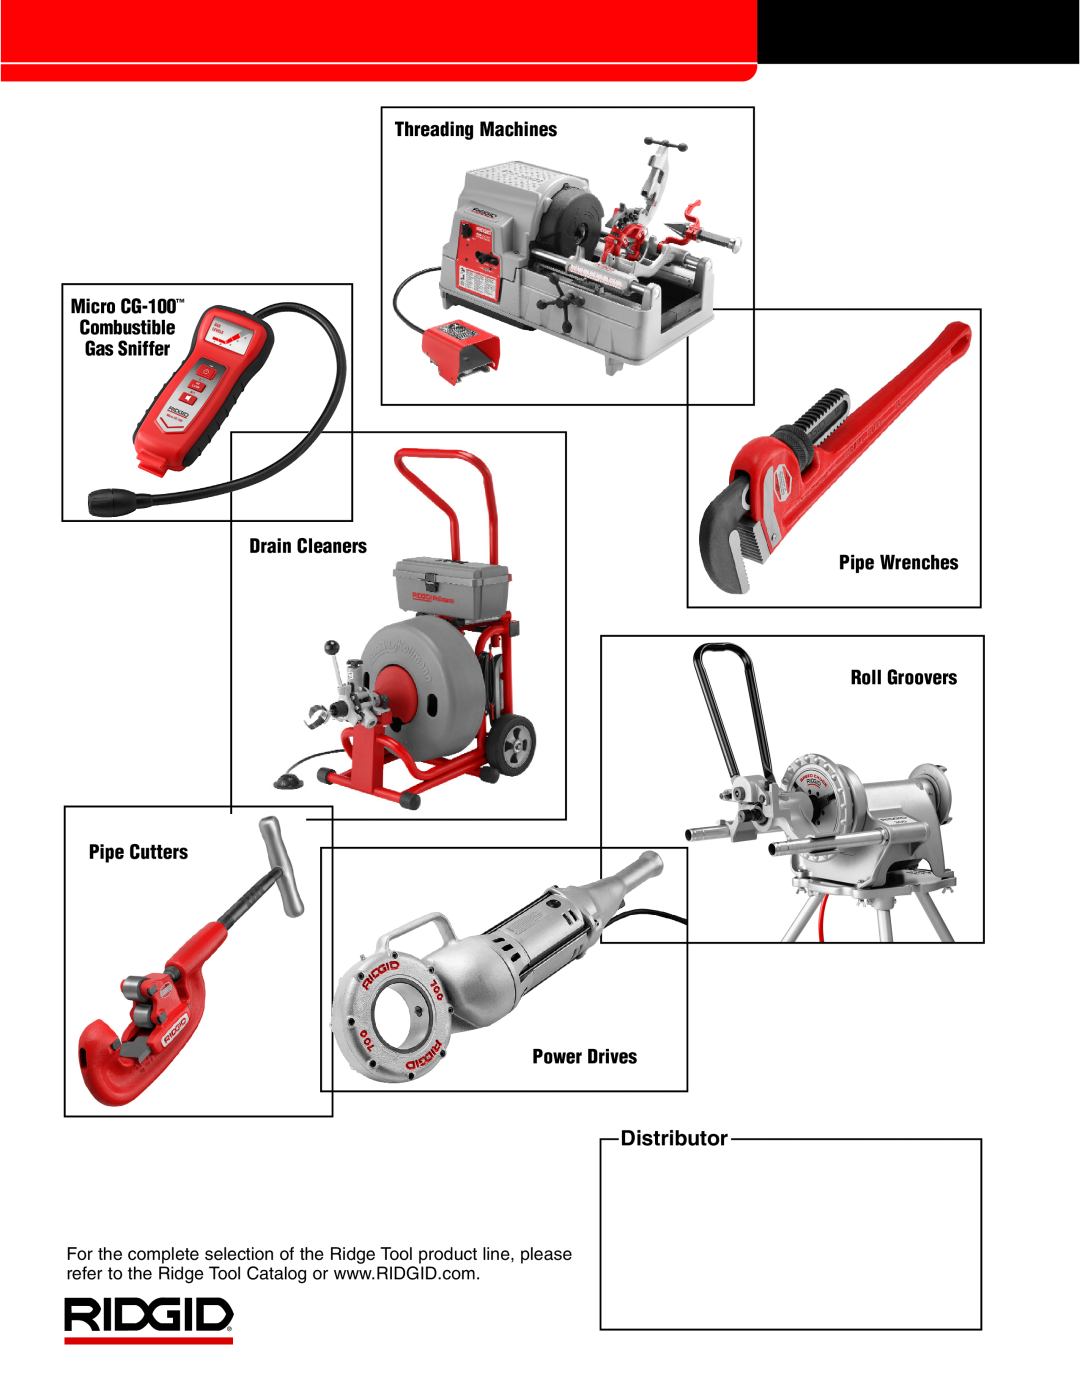 RIDGID 1210 Distributor, Micro CG-100 Combustible Gas Sniffer, Threading Machines, Pipe Wrenches Roll Groovers 